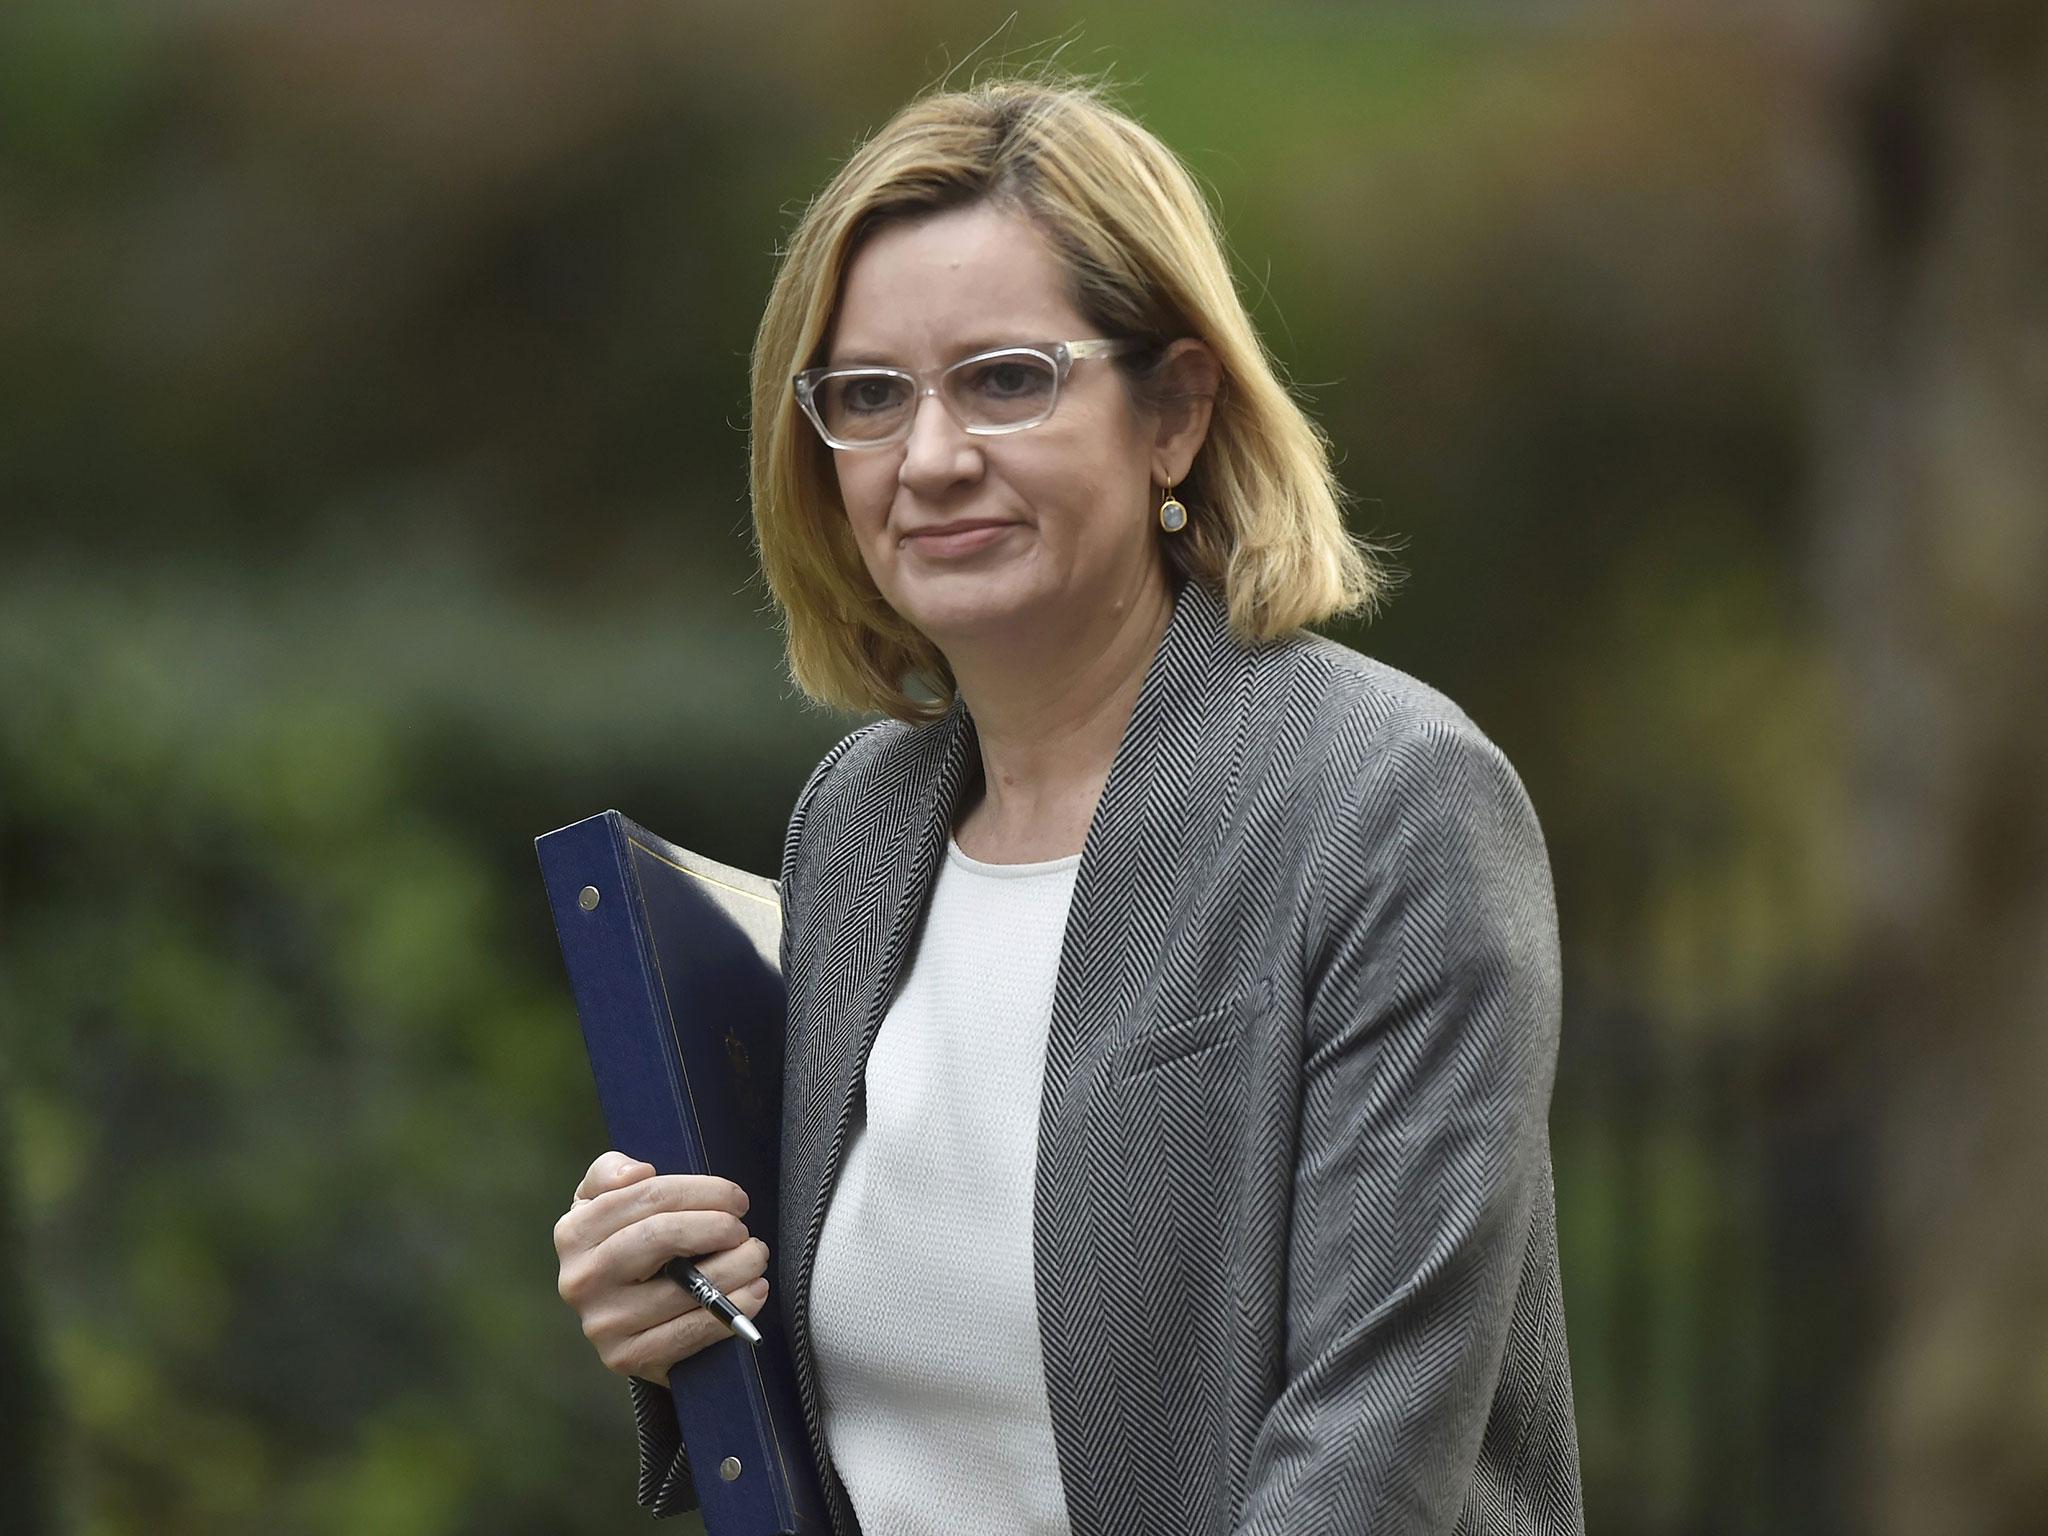 Home Secretary Amber Rudd said people were being kept under suspicion for too long and that ‘cannot be right’